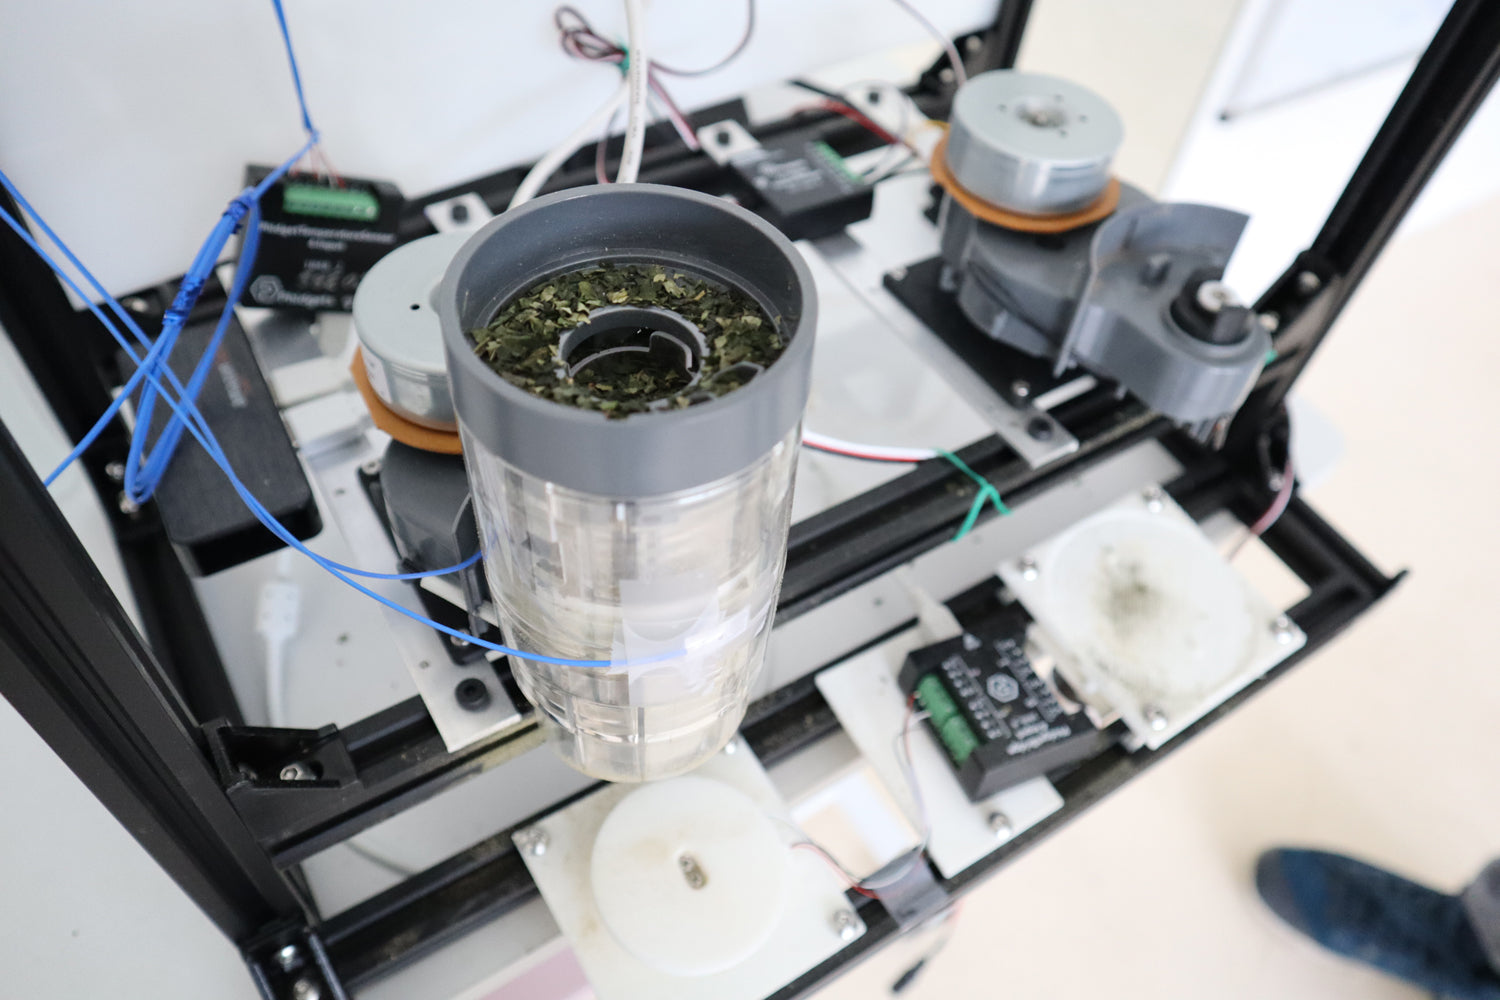 The Matcha Maker mill is tested in the workspace of mechanical engineer Naoto.